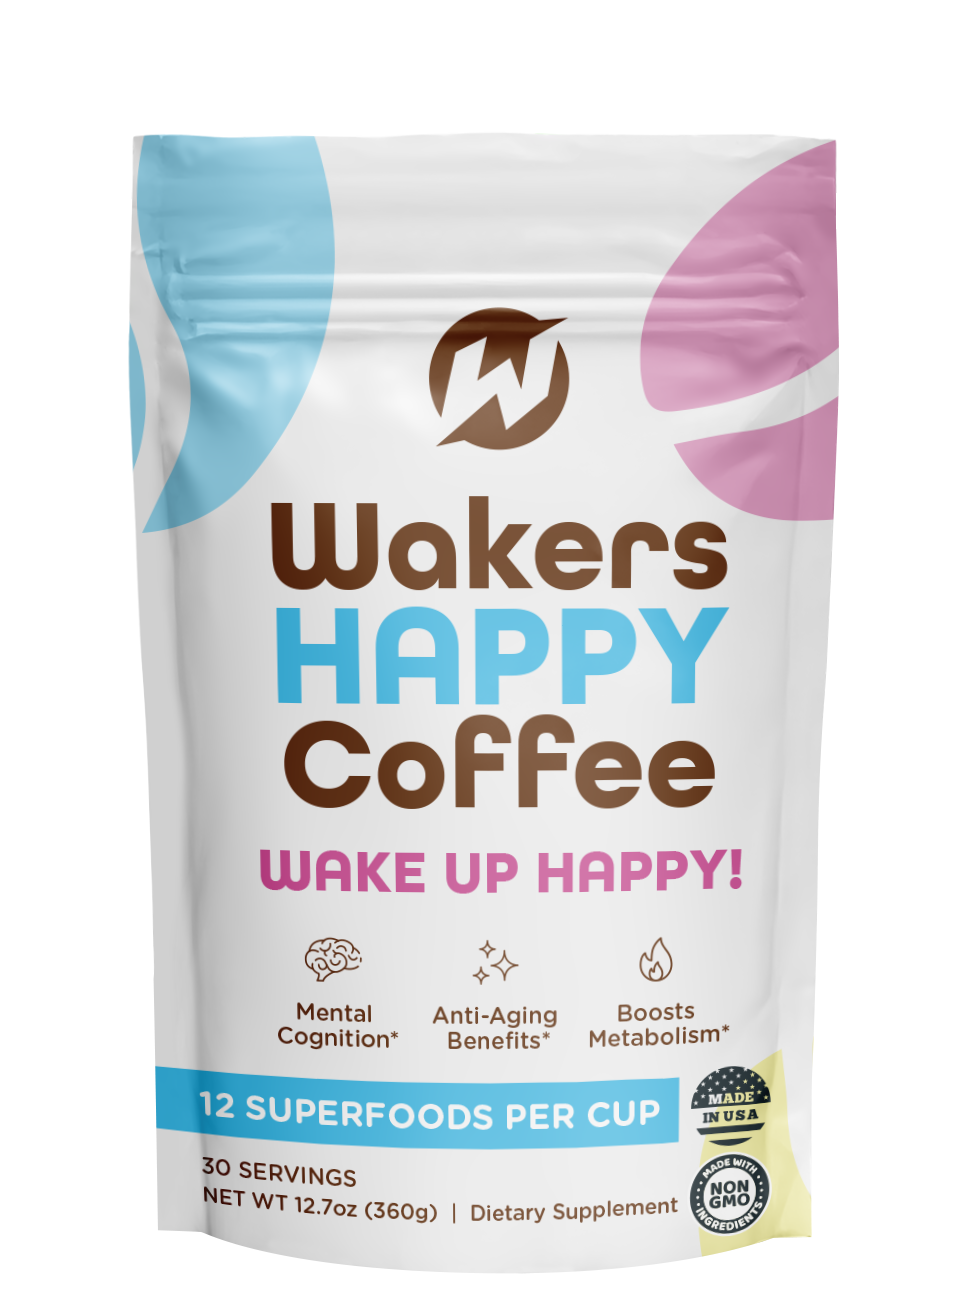 Wakers HAPPY Coffee®️ — Spring Sale Now! Limited Quantities Available.